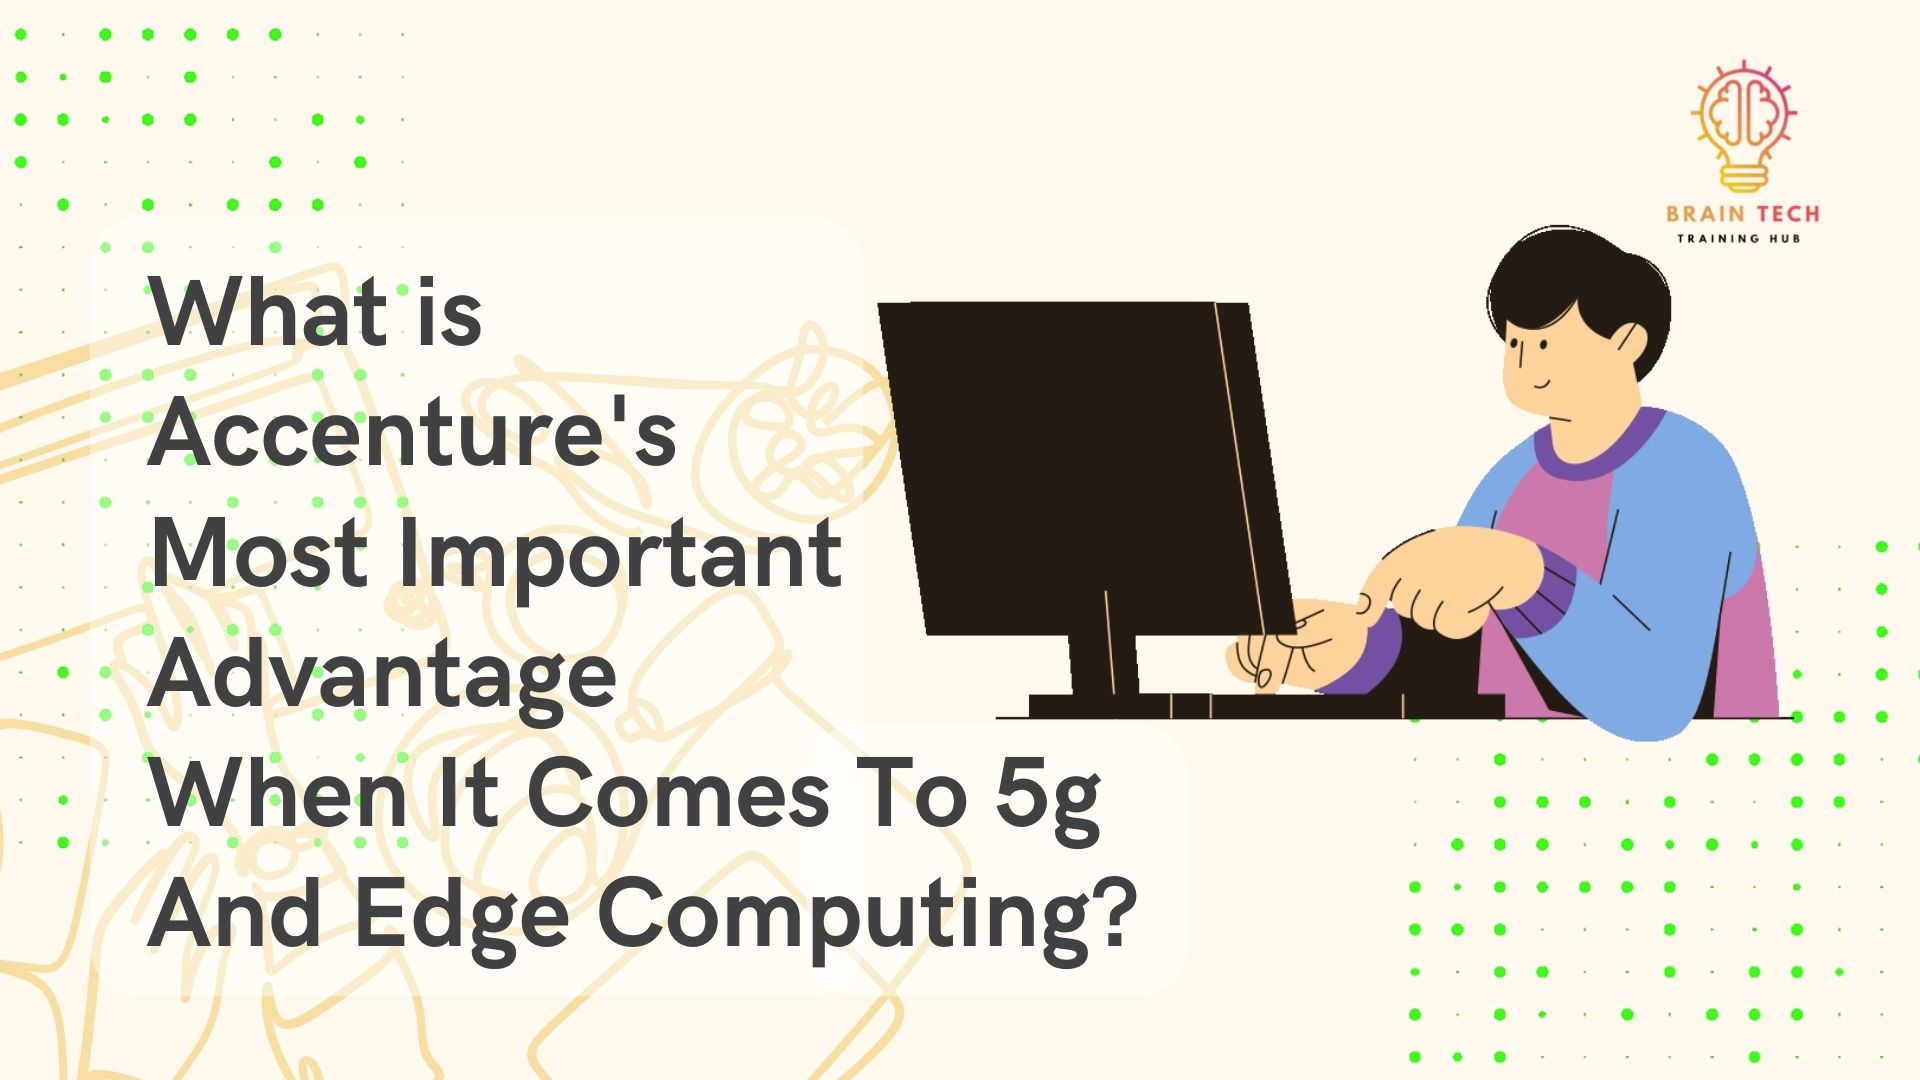 What is Accenture's Most Important Advantage When It Comes To 5g And Edge Computing?